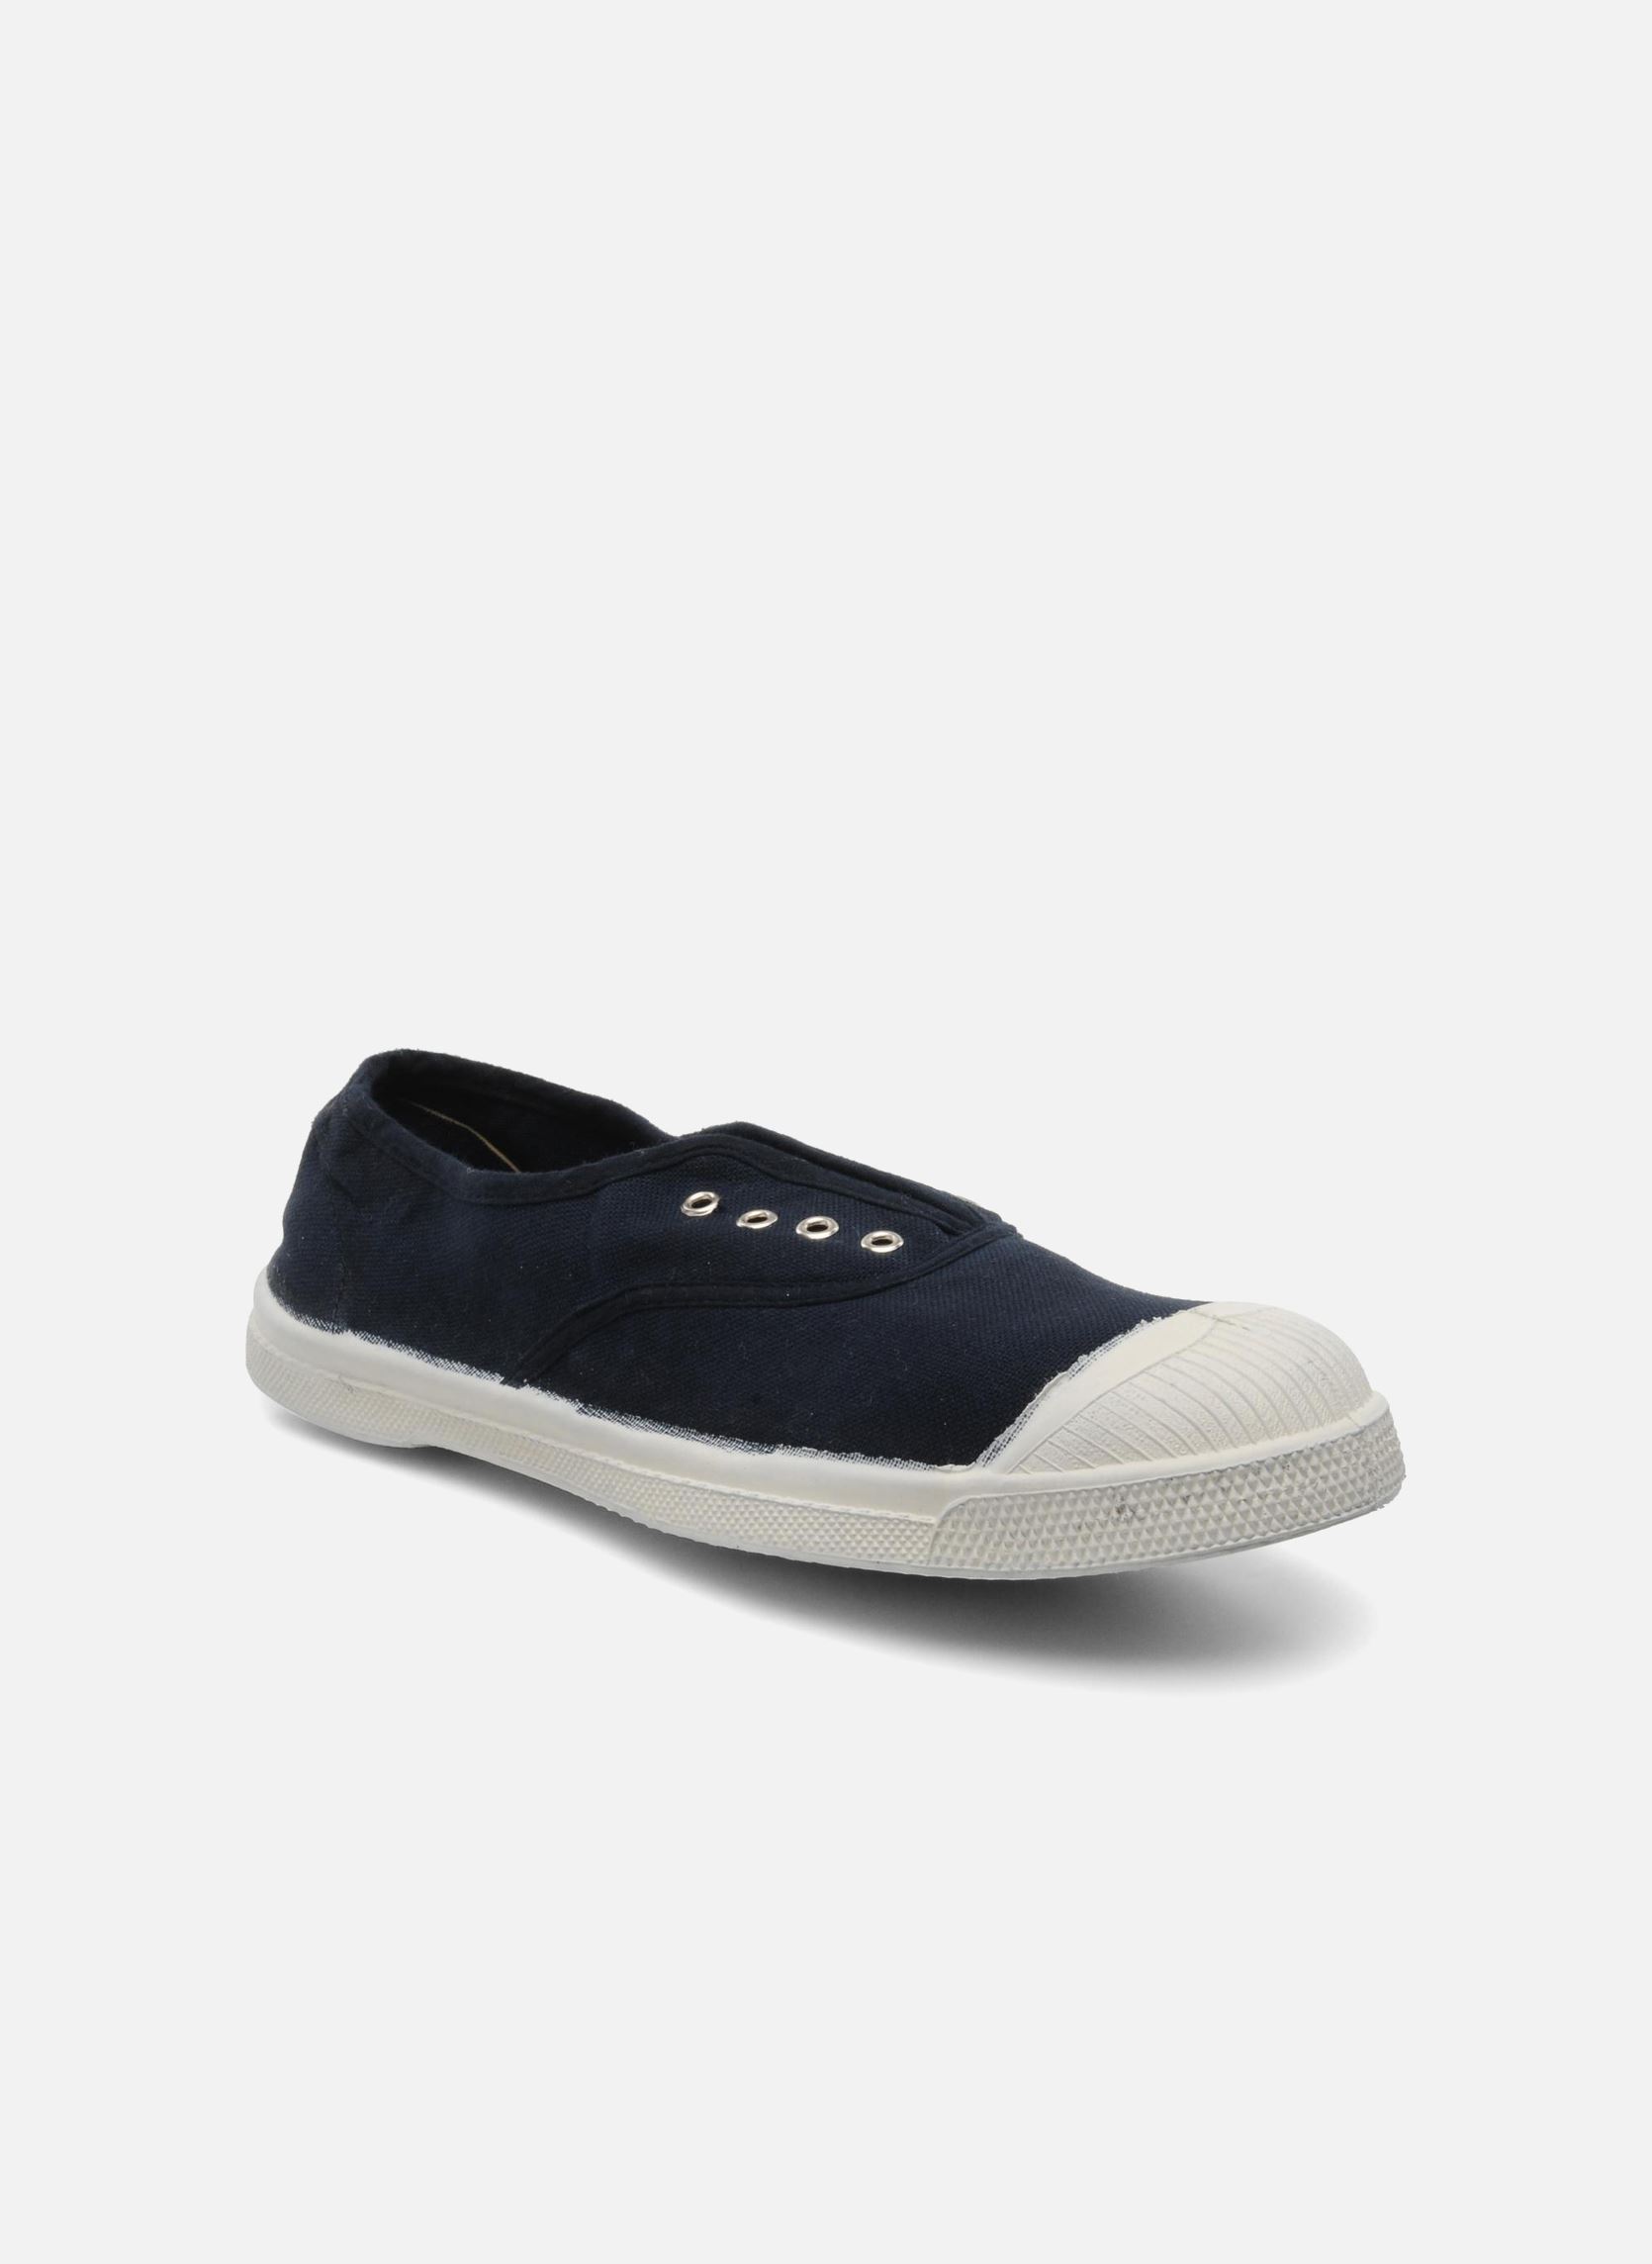 Bensimon Tennis Elly Trainers in Blue at Sarenza.co.uk (105908)